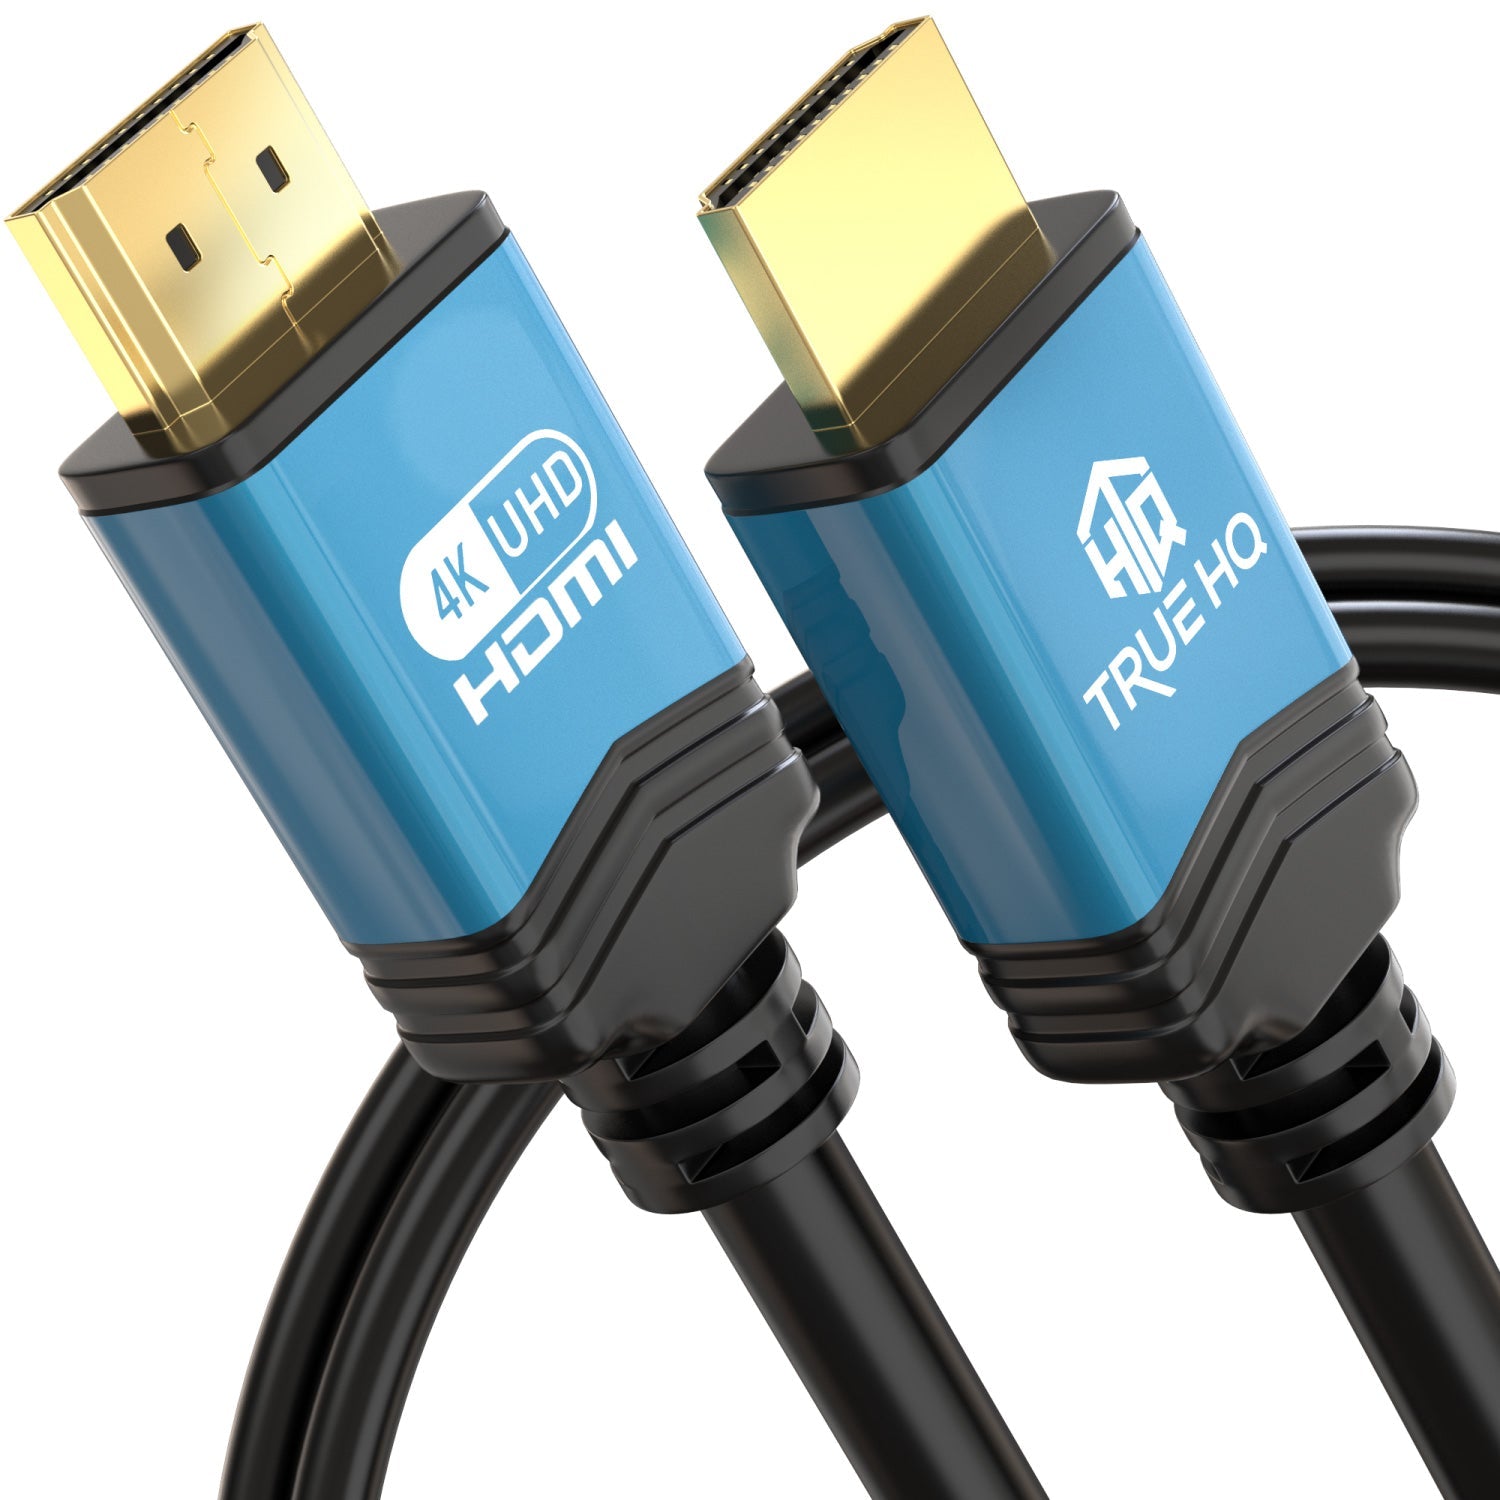 4K HDMI CABLE 6M HDMI LEAD BY TRUE HQ | DESIGNED IN THE UK | ULTRA HIGH SPEED 18GBPS HDMI 2.0 CORD WITH ETHERNET